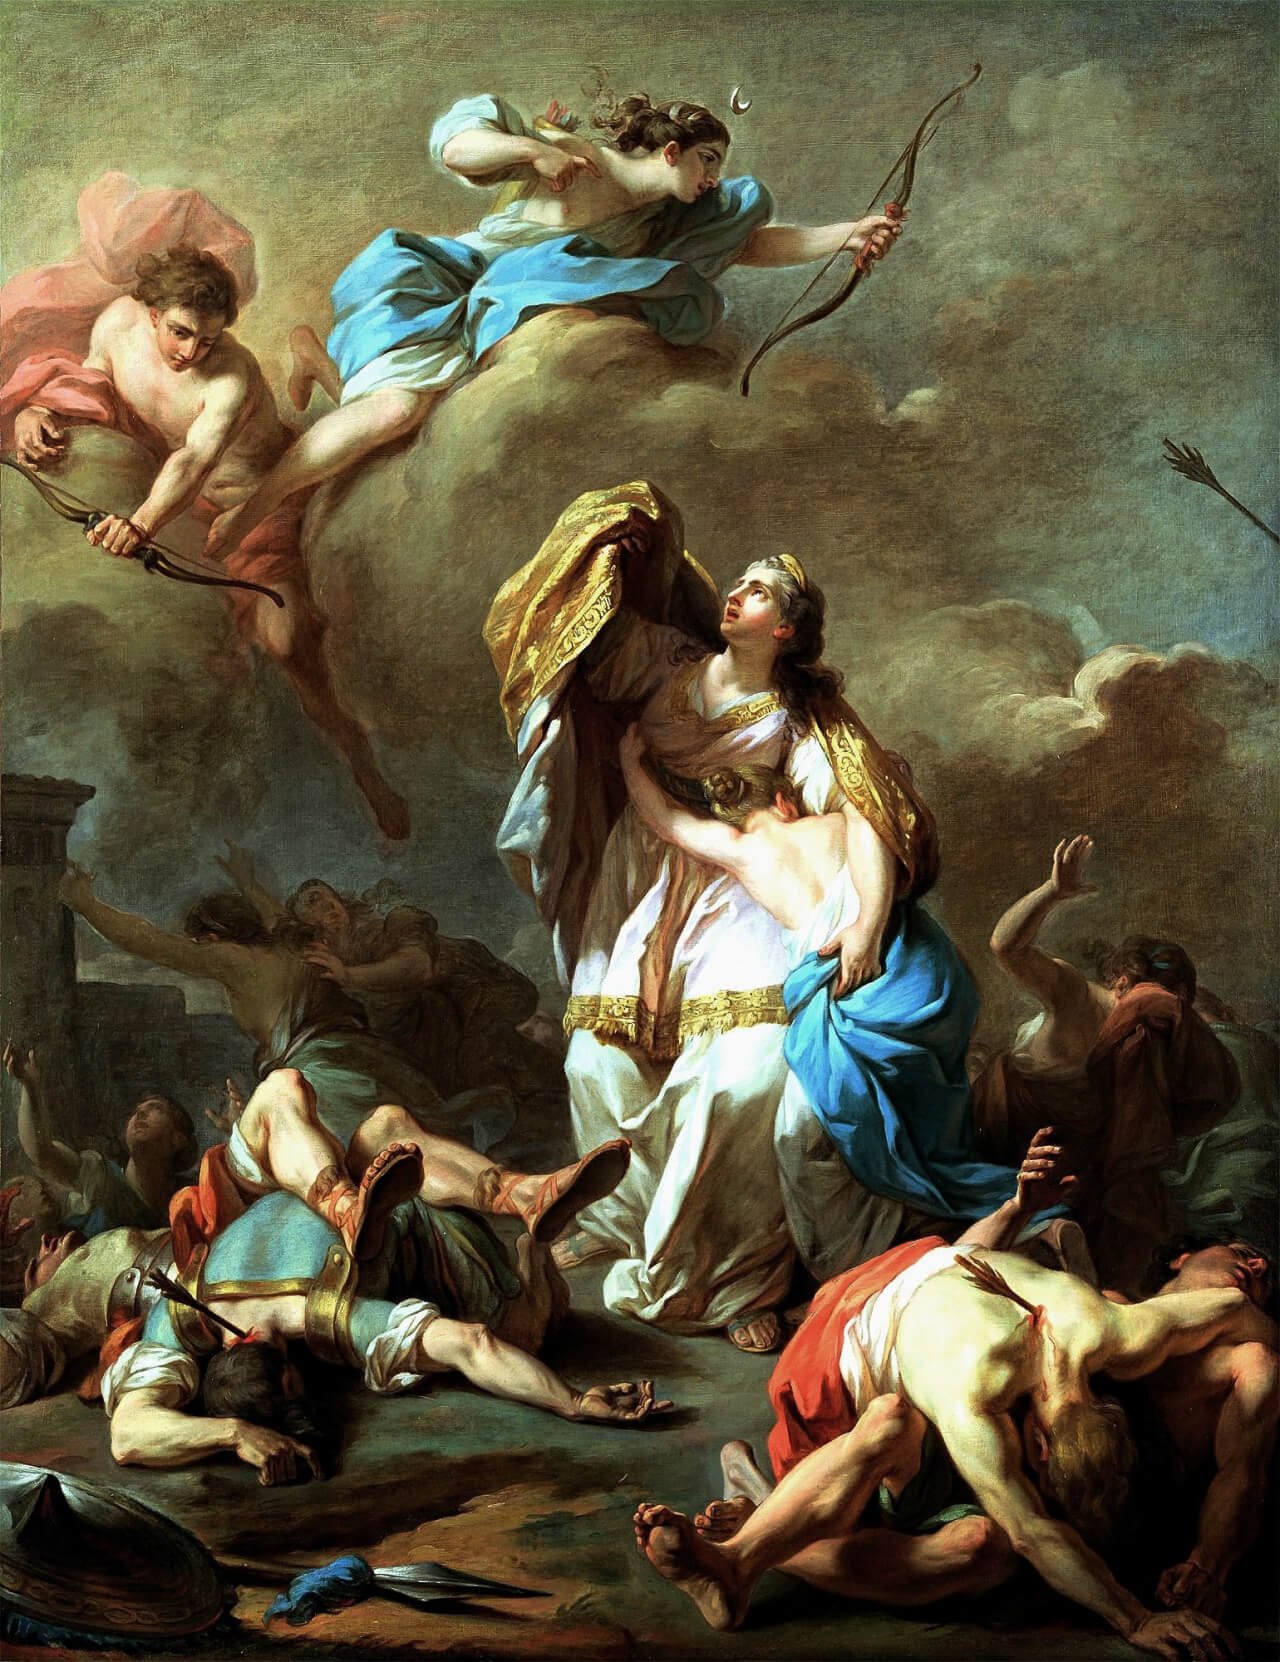 This painting represents Apollo and Artemis slaying the children of Niobe with their bows and arrows.